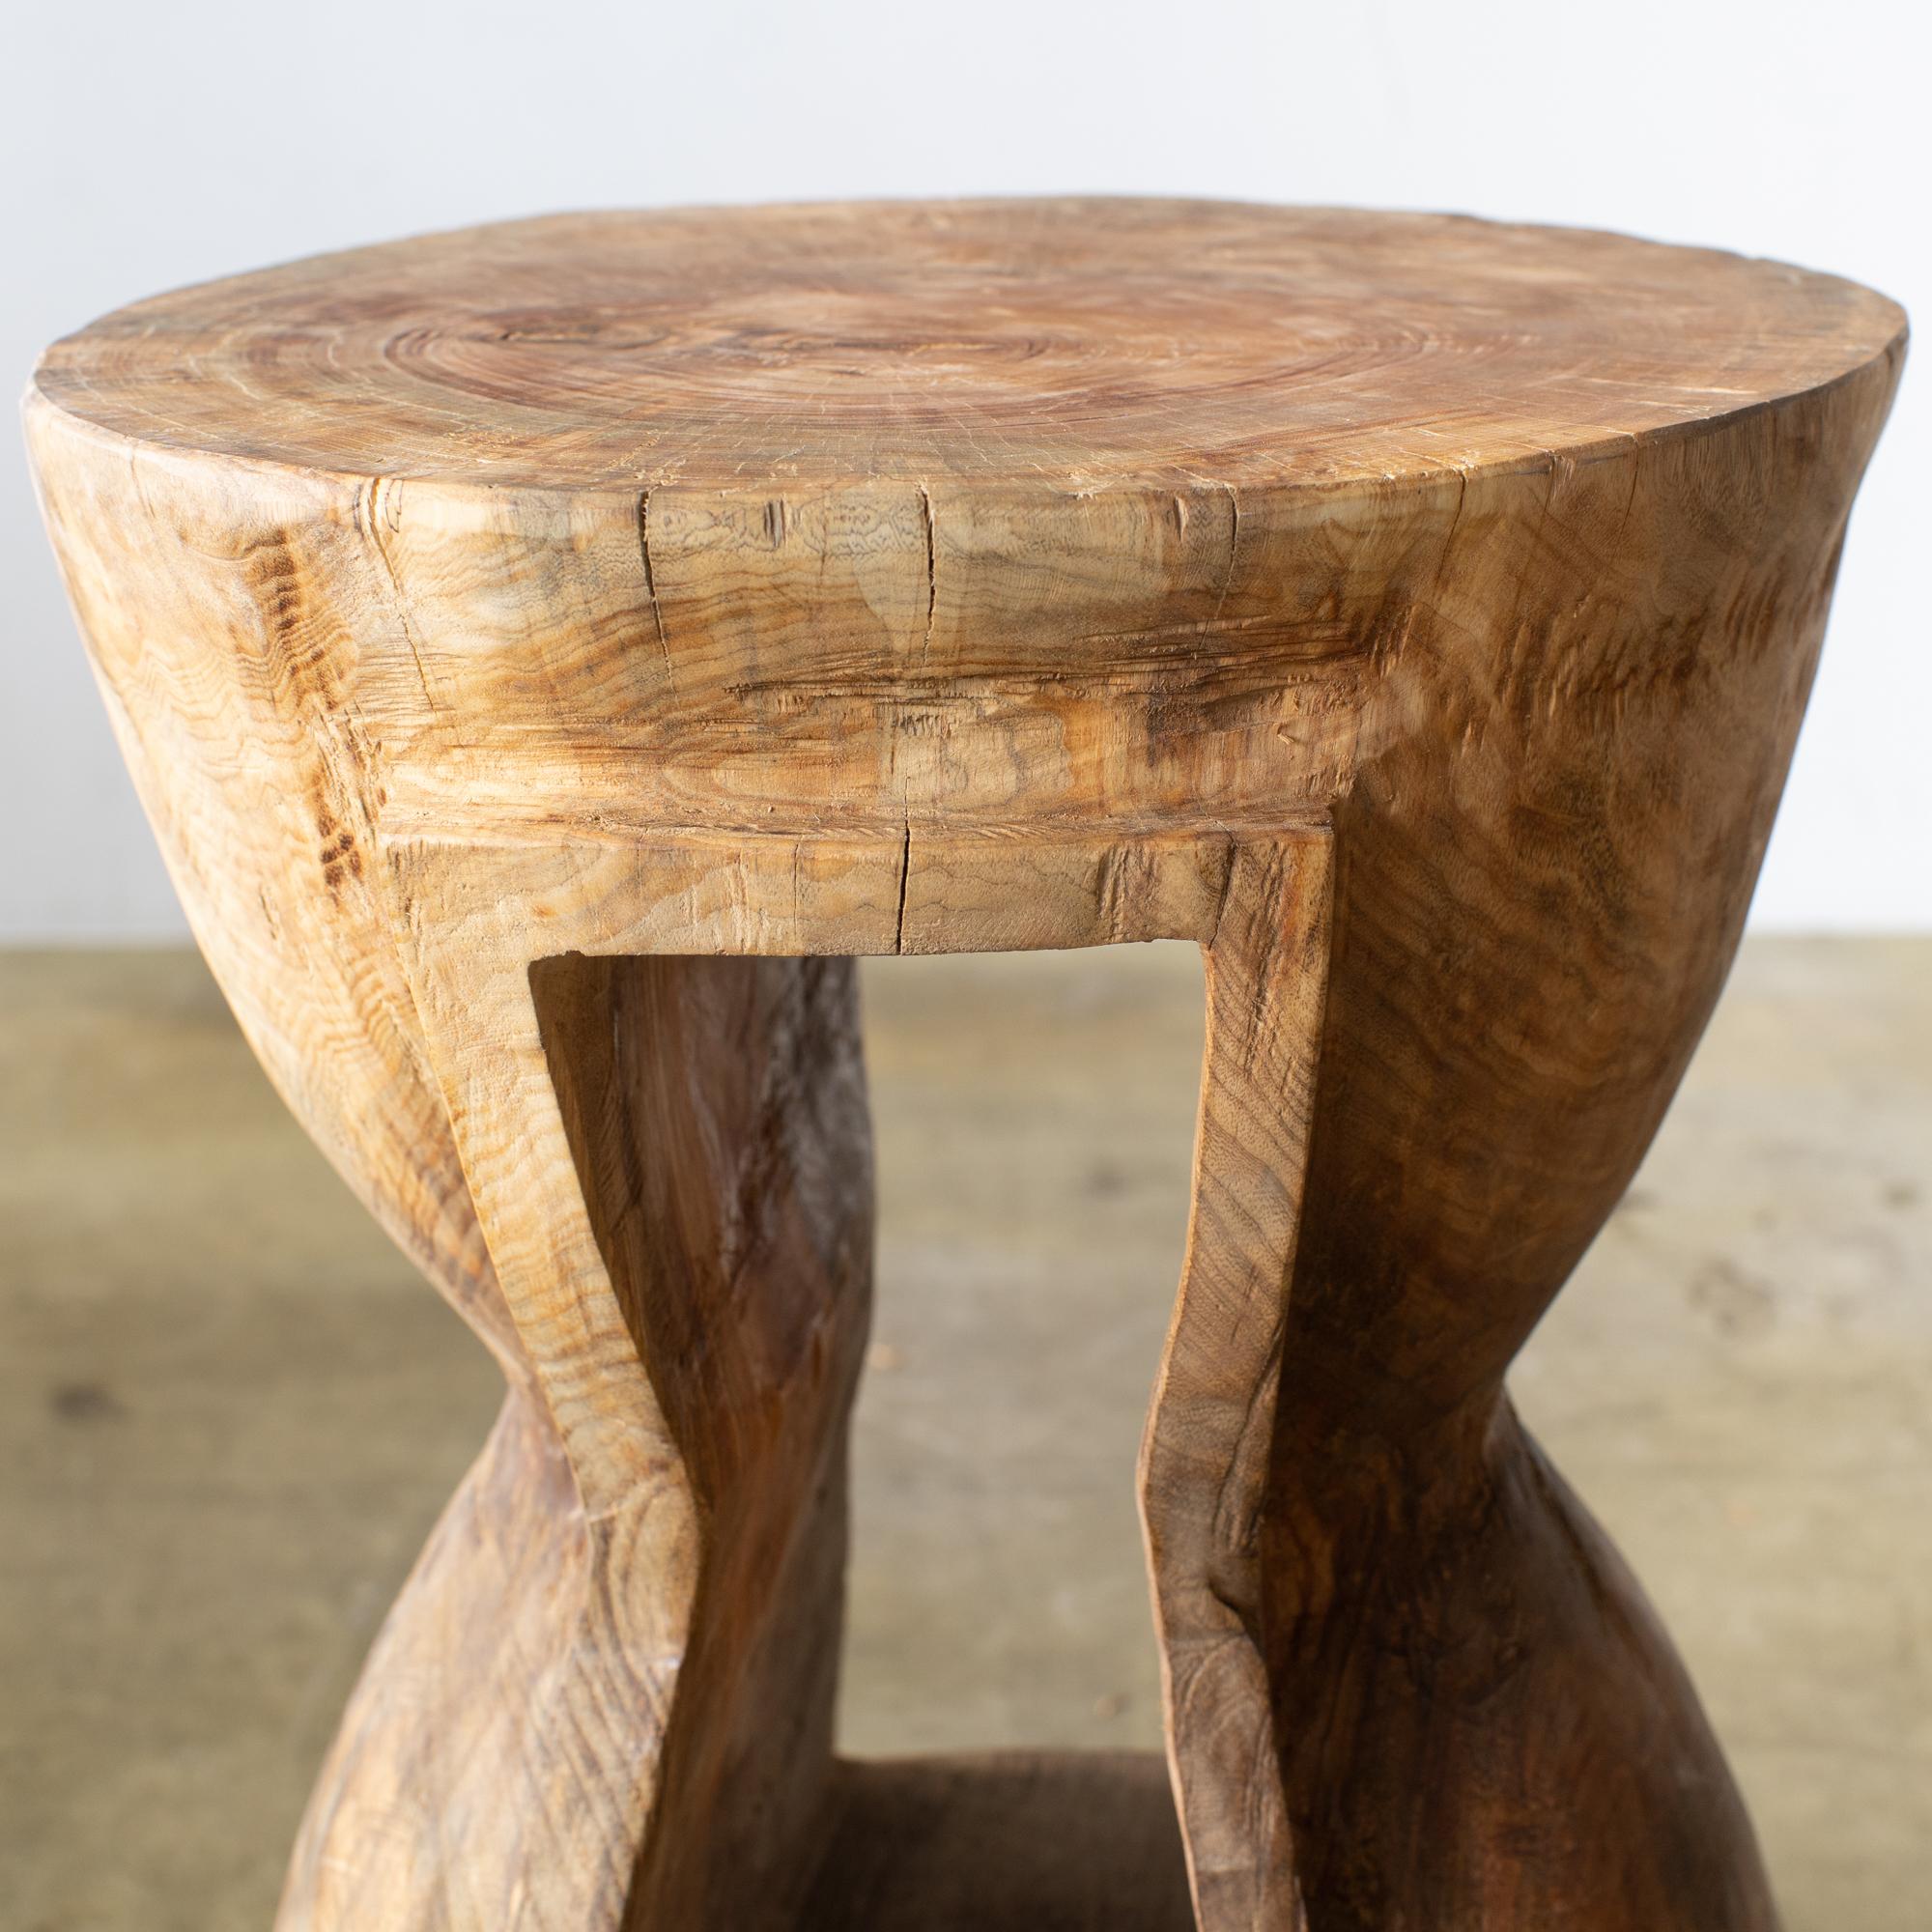 Hand-Carved Hiroyuki Nishimura Sculptural Side Table Stool 24 Glamping Tribal Style For Sale